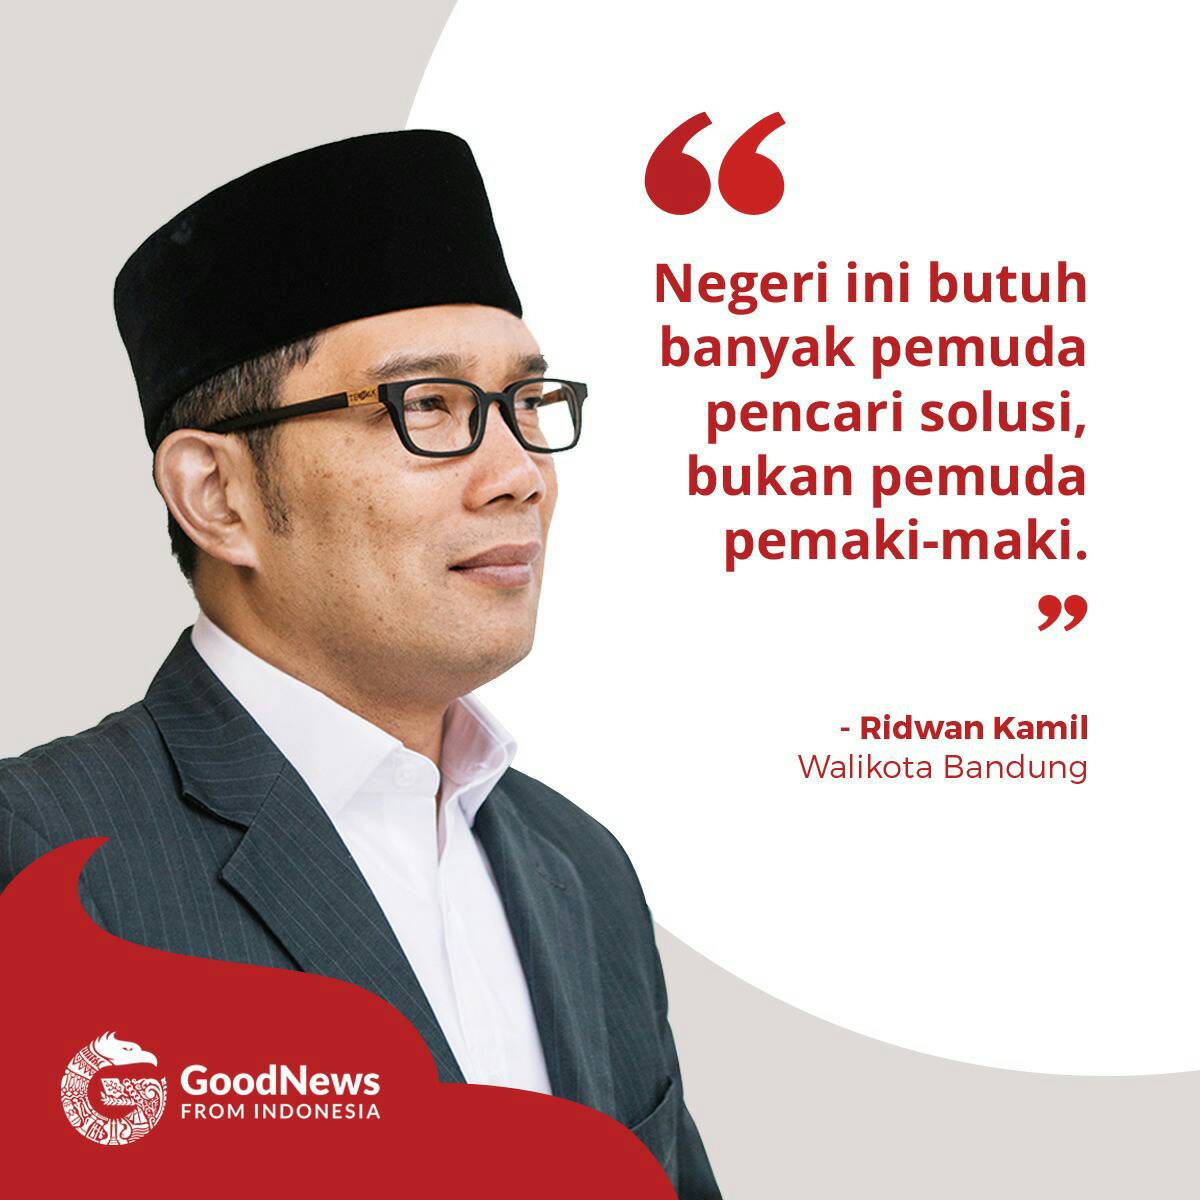 Good News From Indonesia on Twitter: "[QUOTE] Ridwan Kamil: Inspirasi